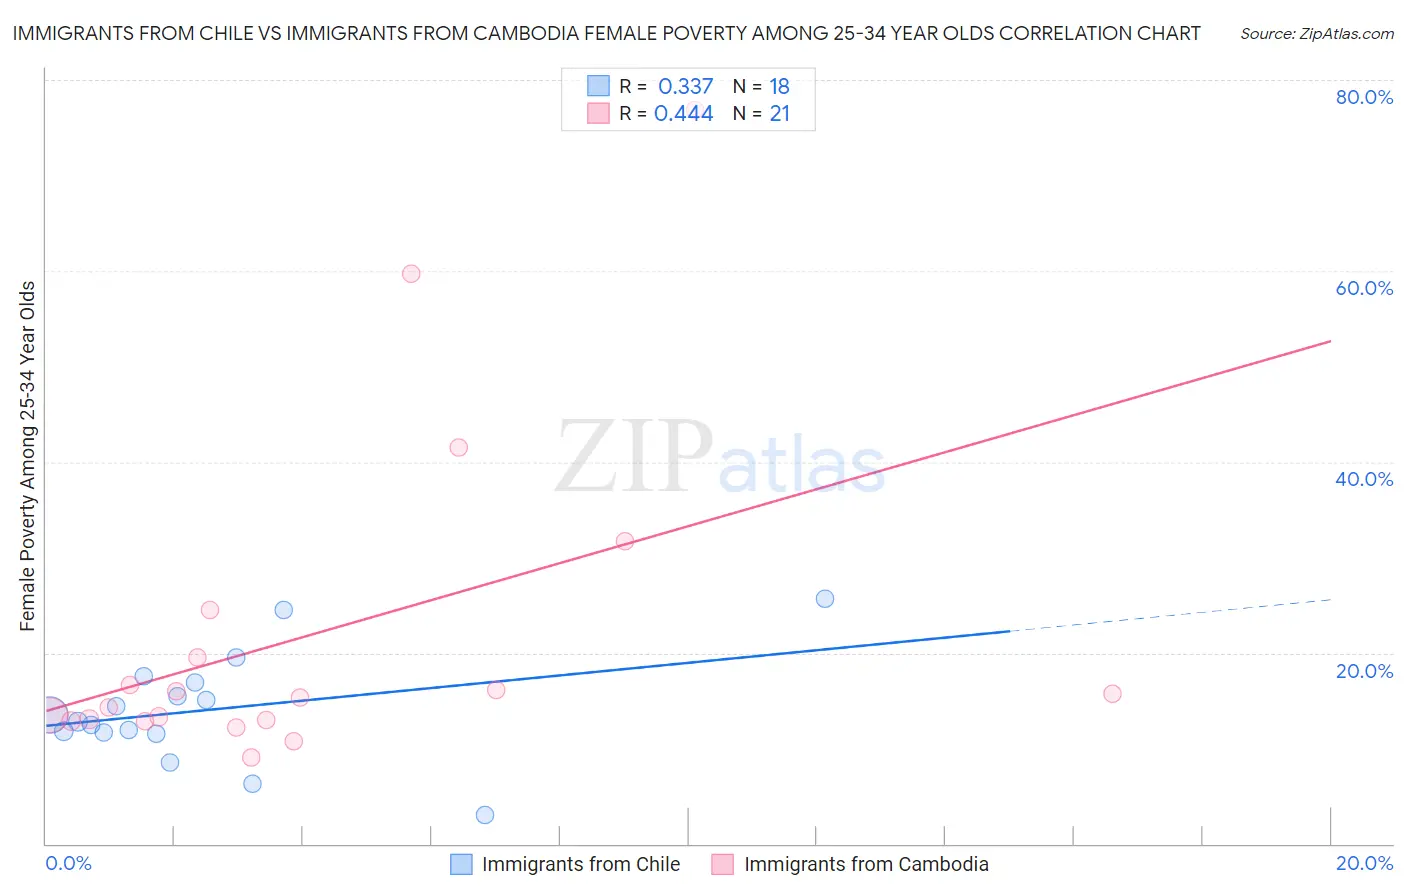 Immigrants from Chile vs Immigrants from Cambodia Female Poverty Among 25-34 Year Olds